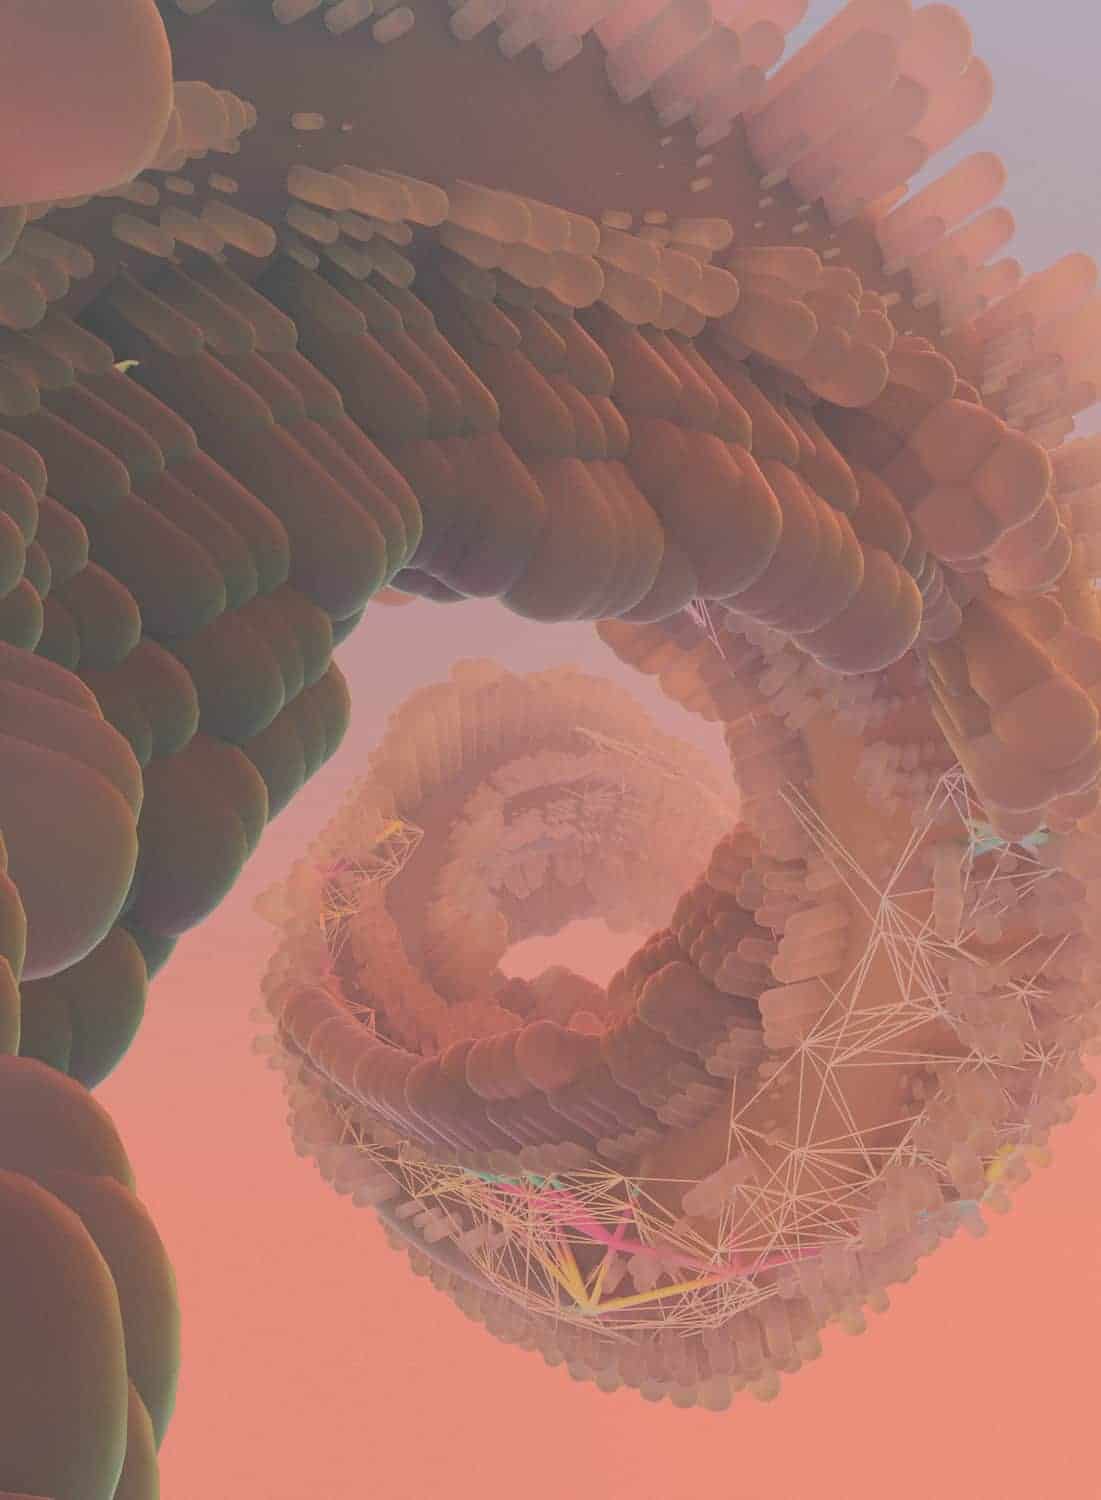 3D C4D | The Imaginative Futuristic and Surreal Worlds of Mike Winkelmann (Beeple) – Swirl